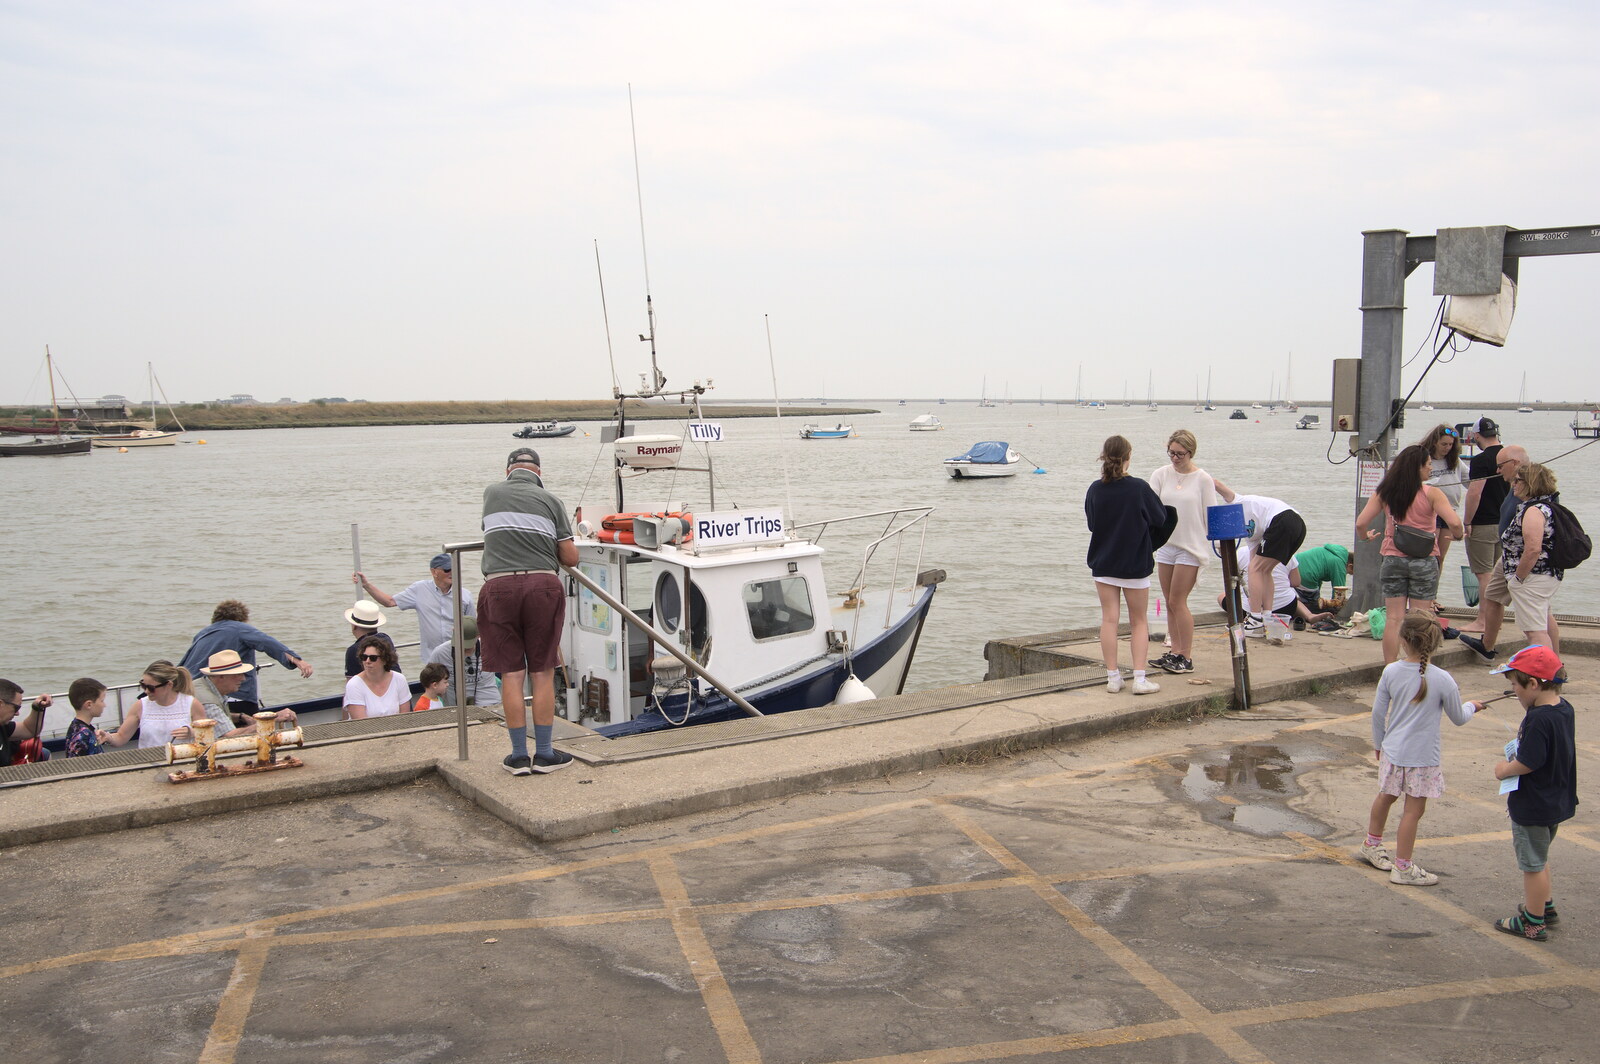 A river trip comes in from A Trip to Orford Ness, Orford, Suffolk - 16th August 2022